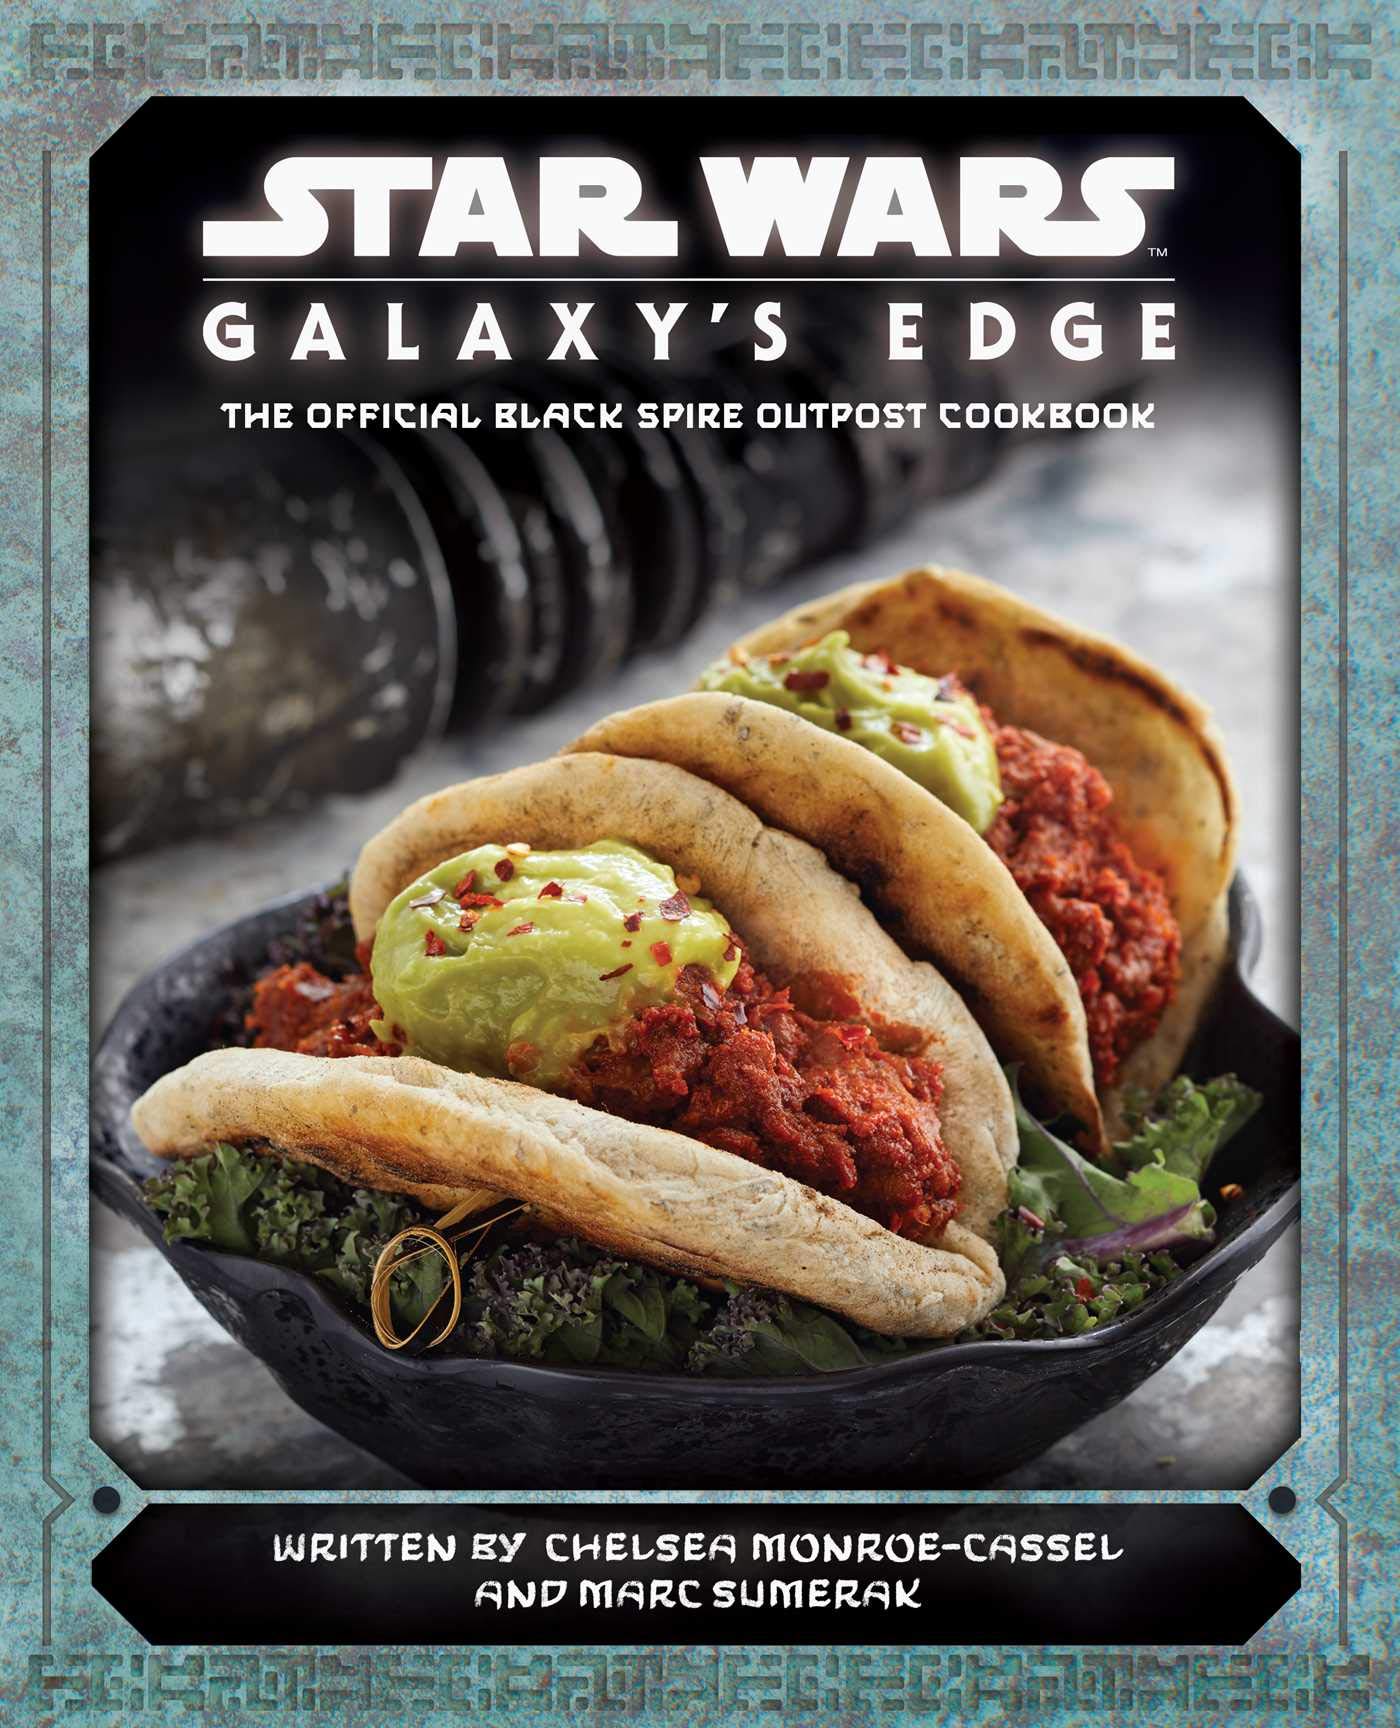 Image of the book cover for Star Wars Galaxy's Edge Cookbook.